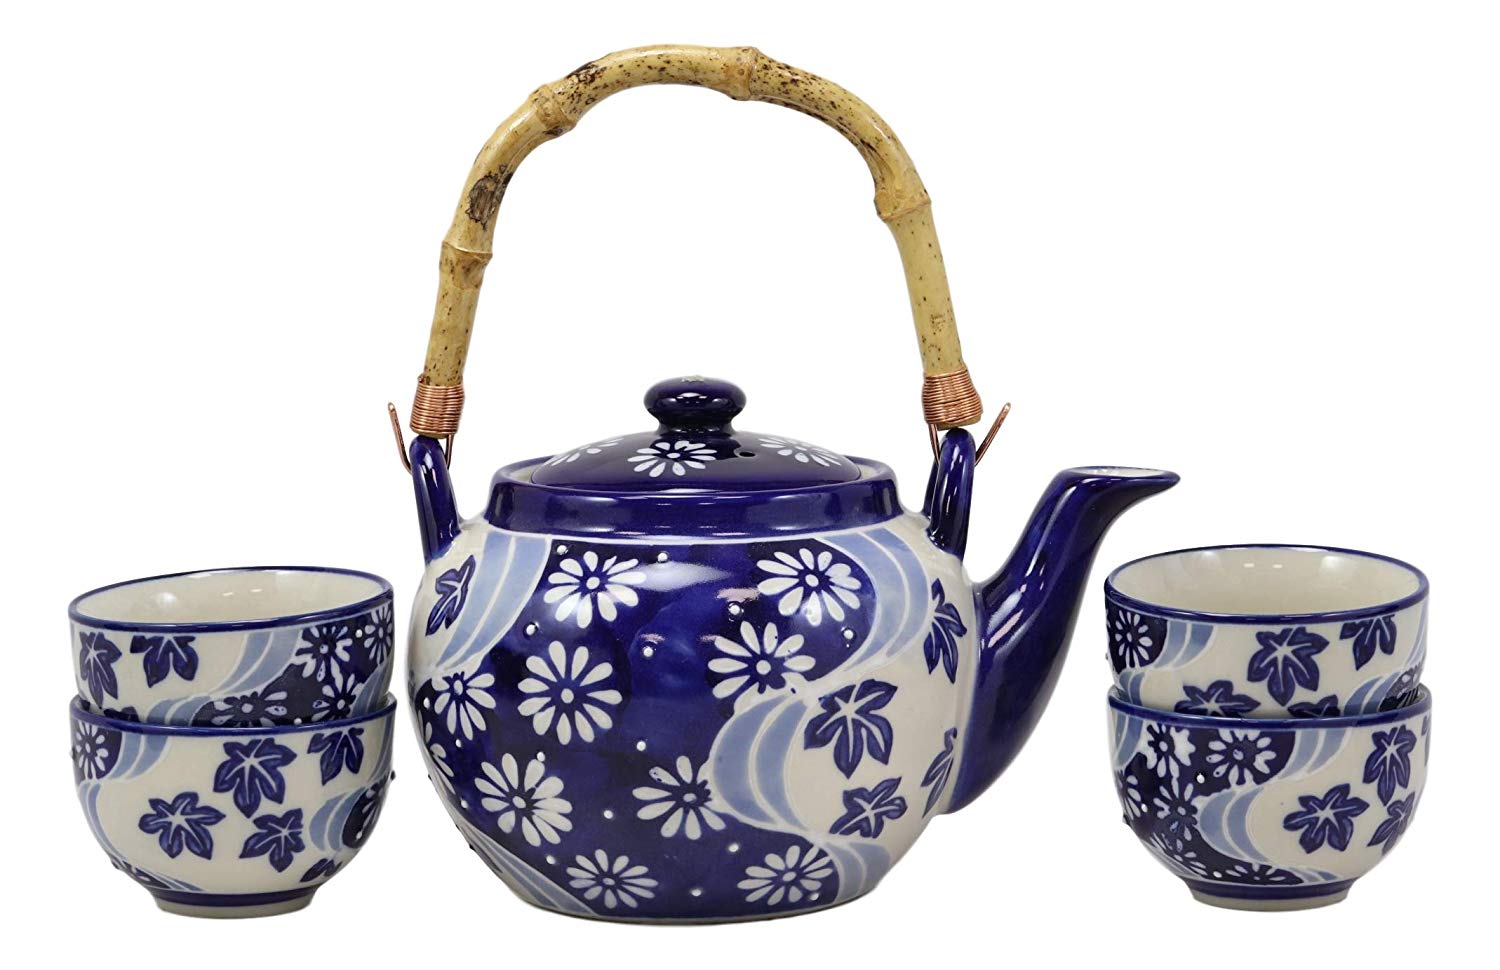 Chrysanthemum Autumn Colorful Large Floral Blooms 25oz Tea Pot With 4 Cups Set - image 5 of 7